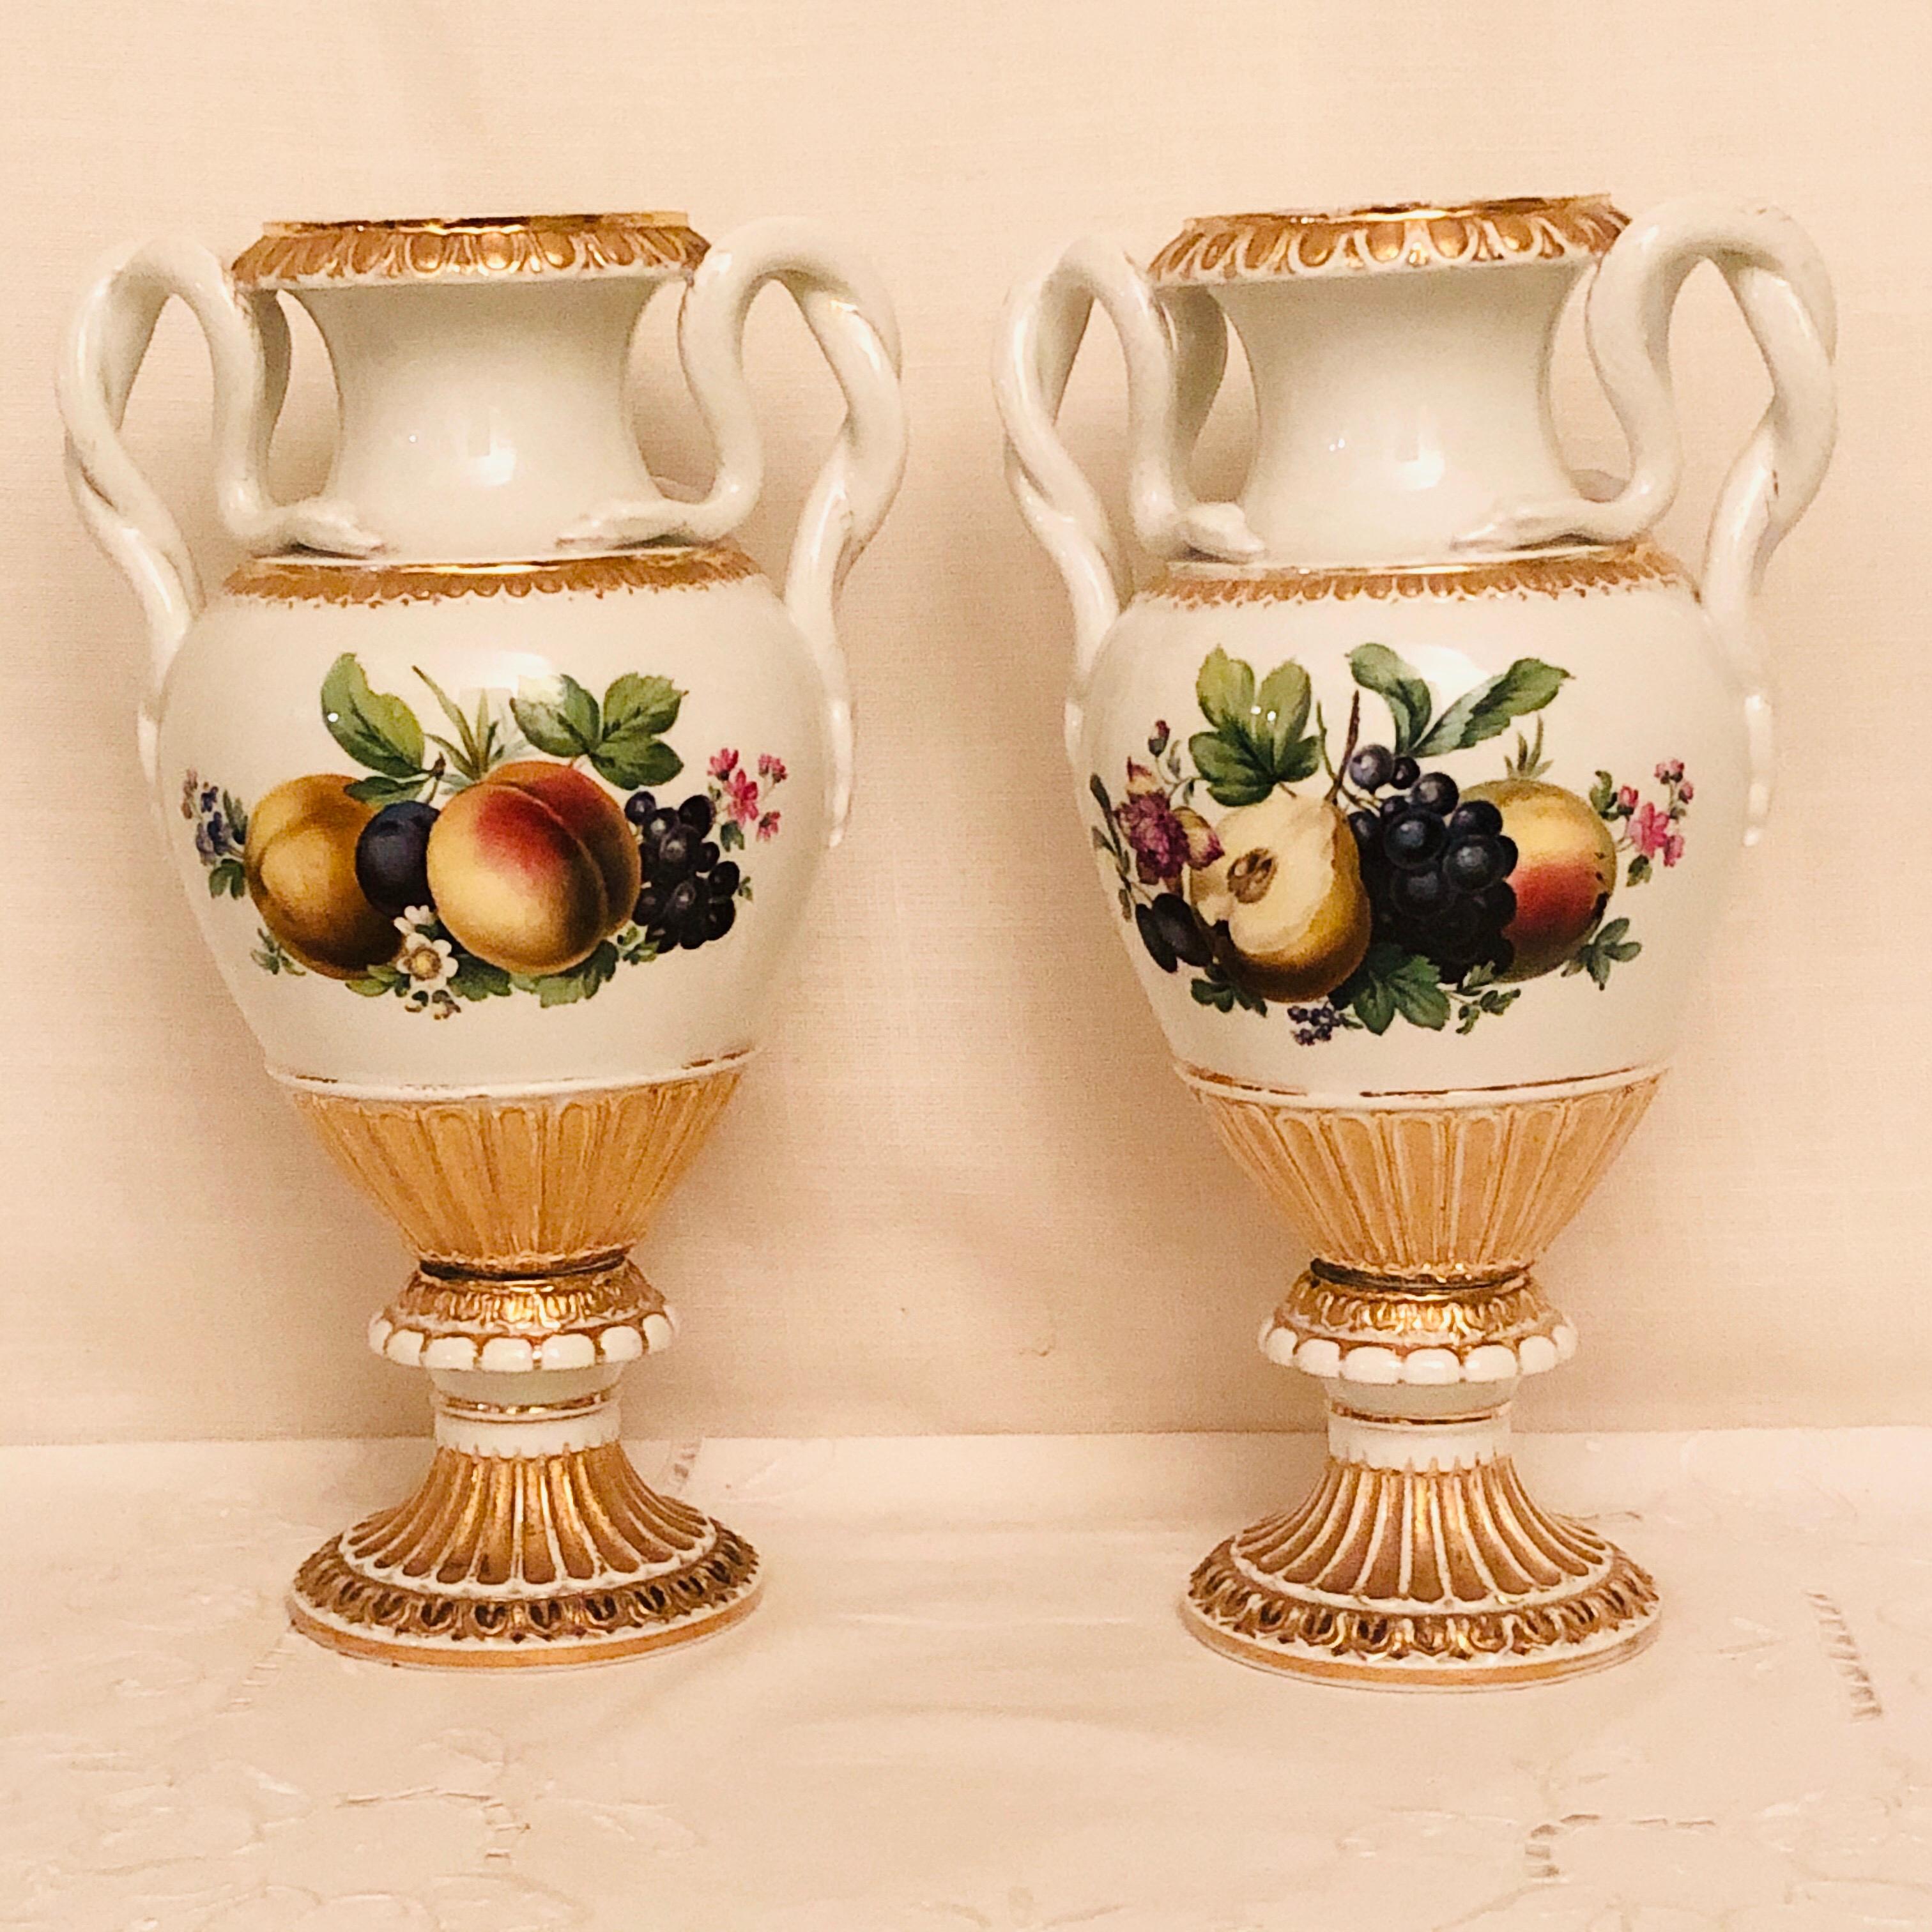 Pair of Meissen vases with snake handles and different still life paintings of fruit on all four sides. The paintings of fruit on these vases are so well done that the fruits look real. They would be a fabulous decoration on your mantel (fireplace),